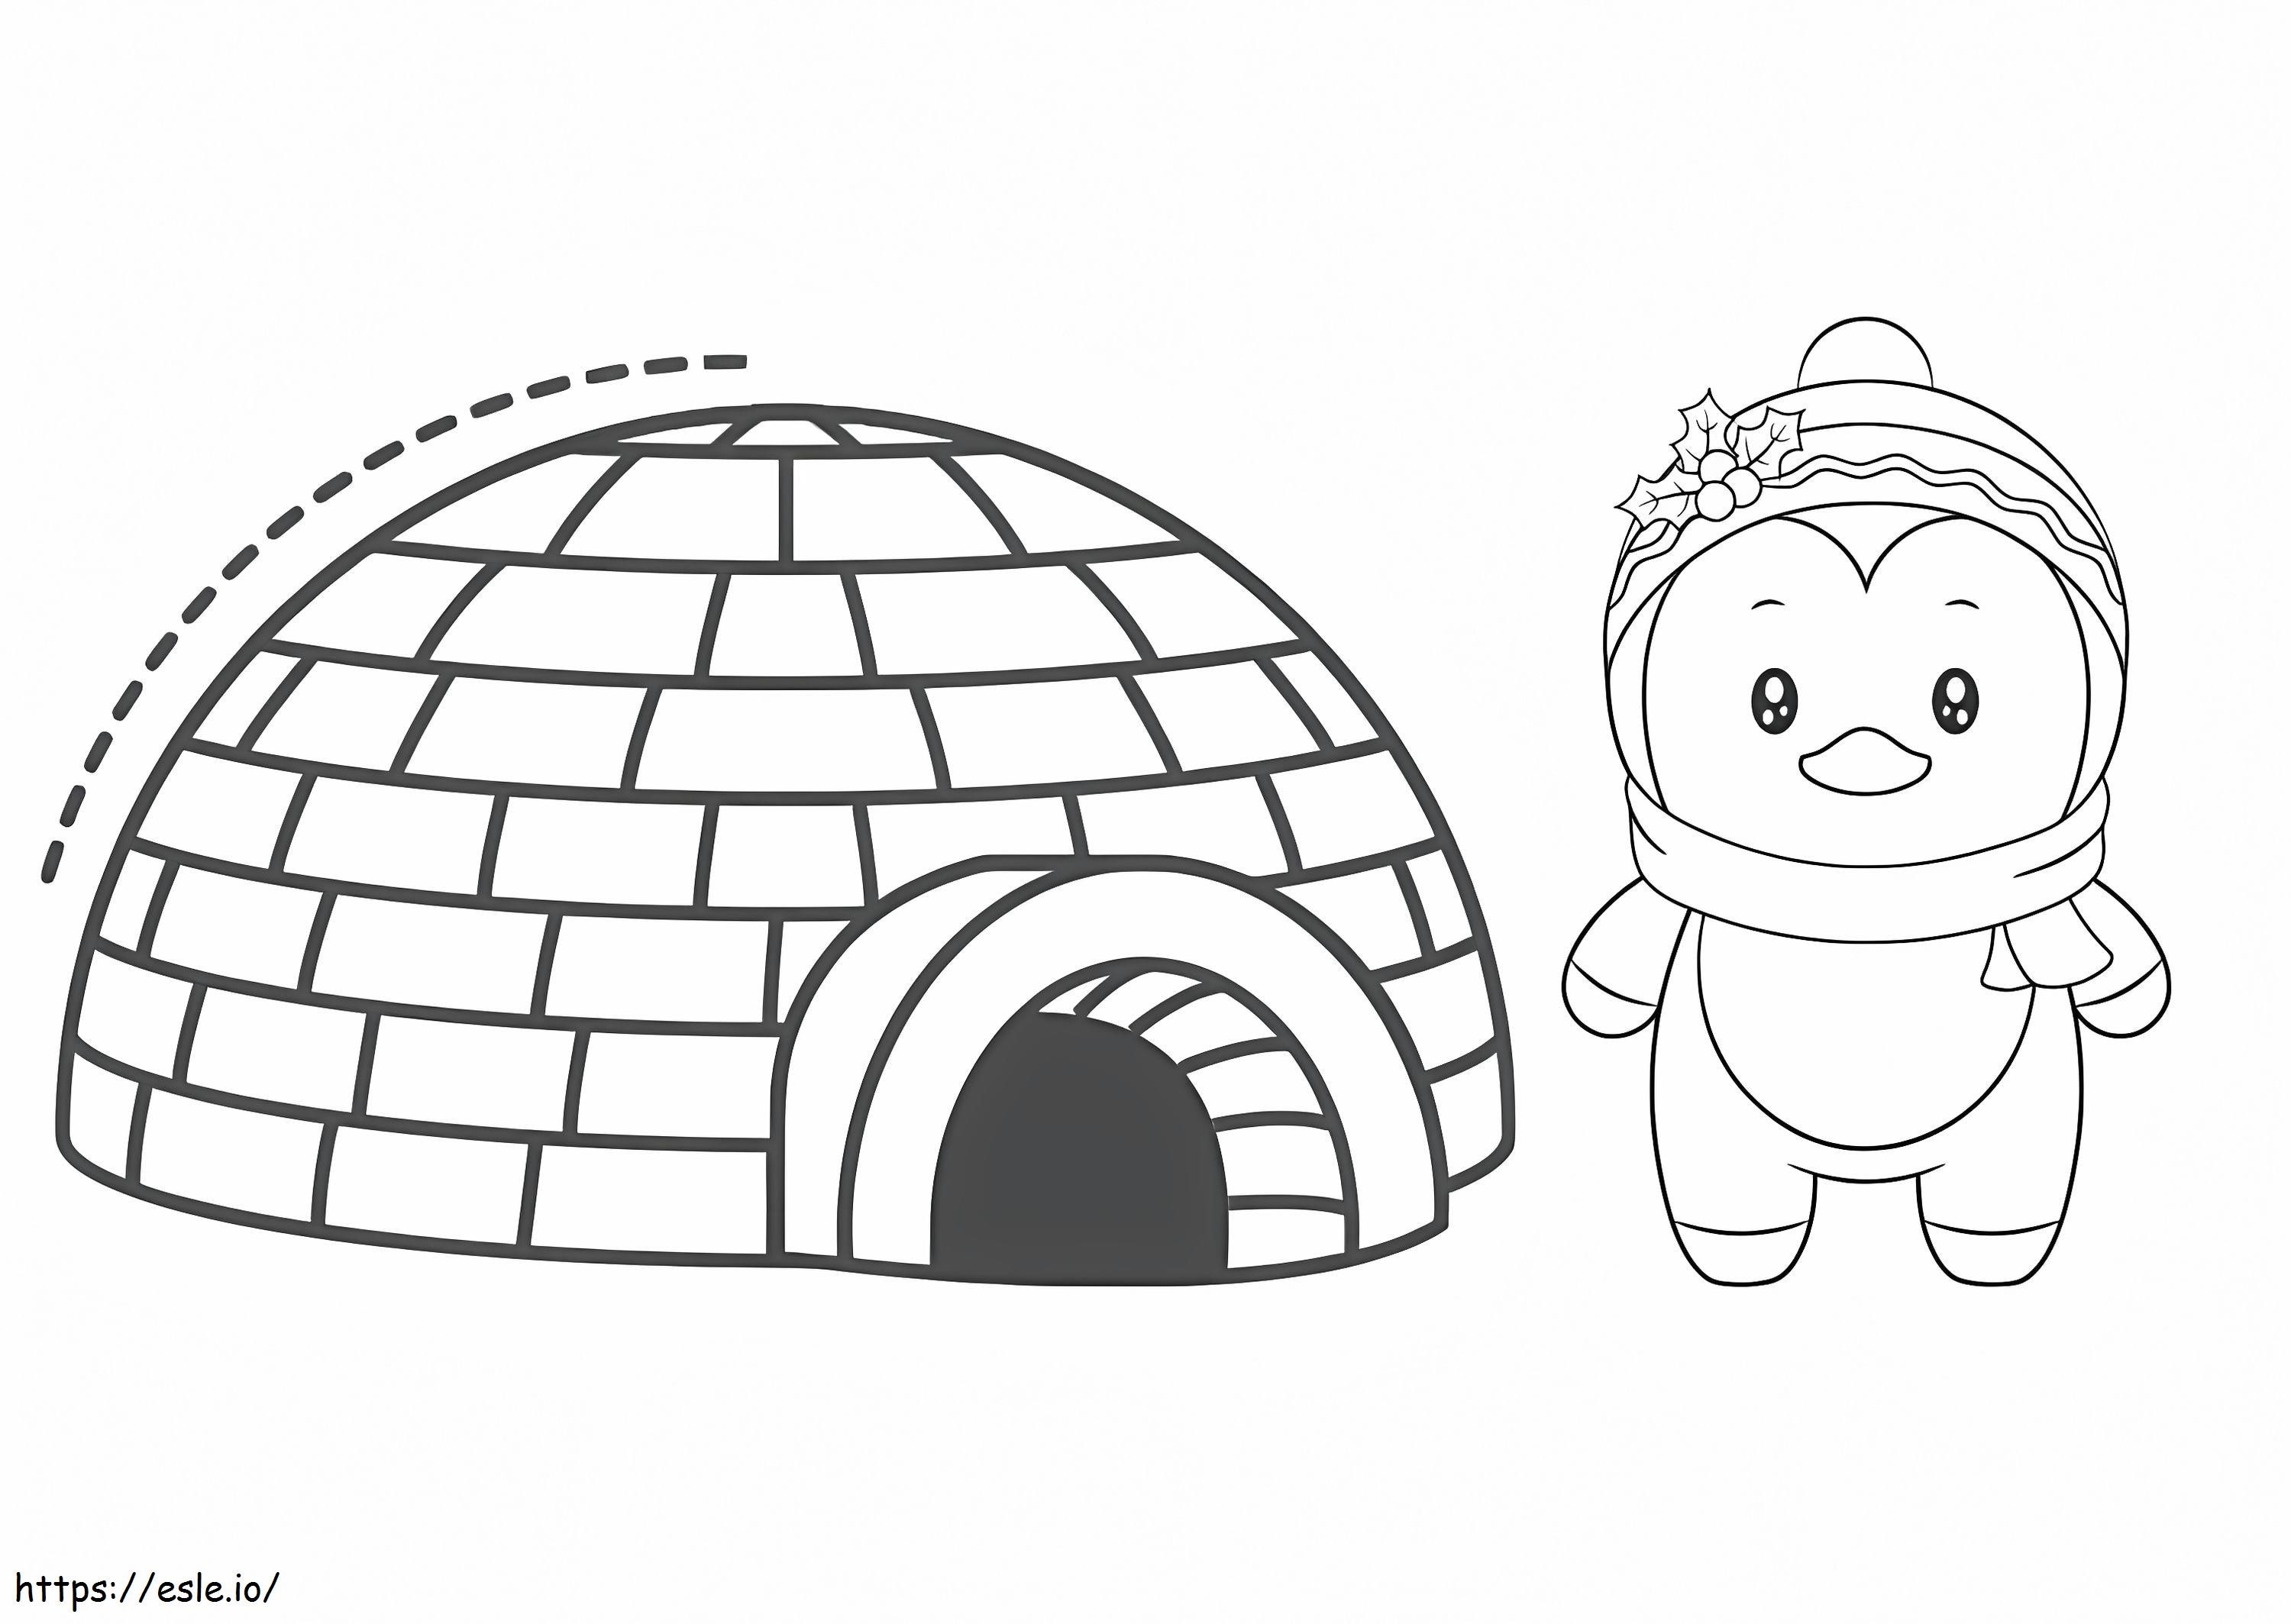 Igloo 15 coloring page